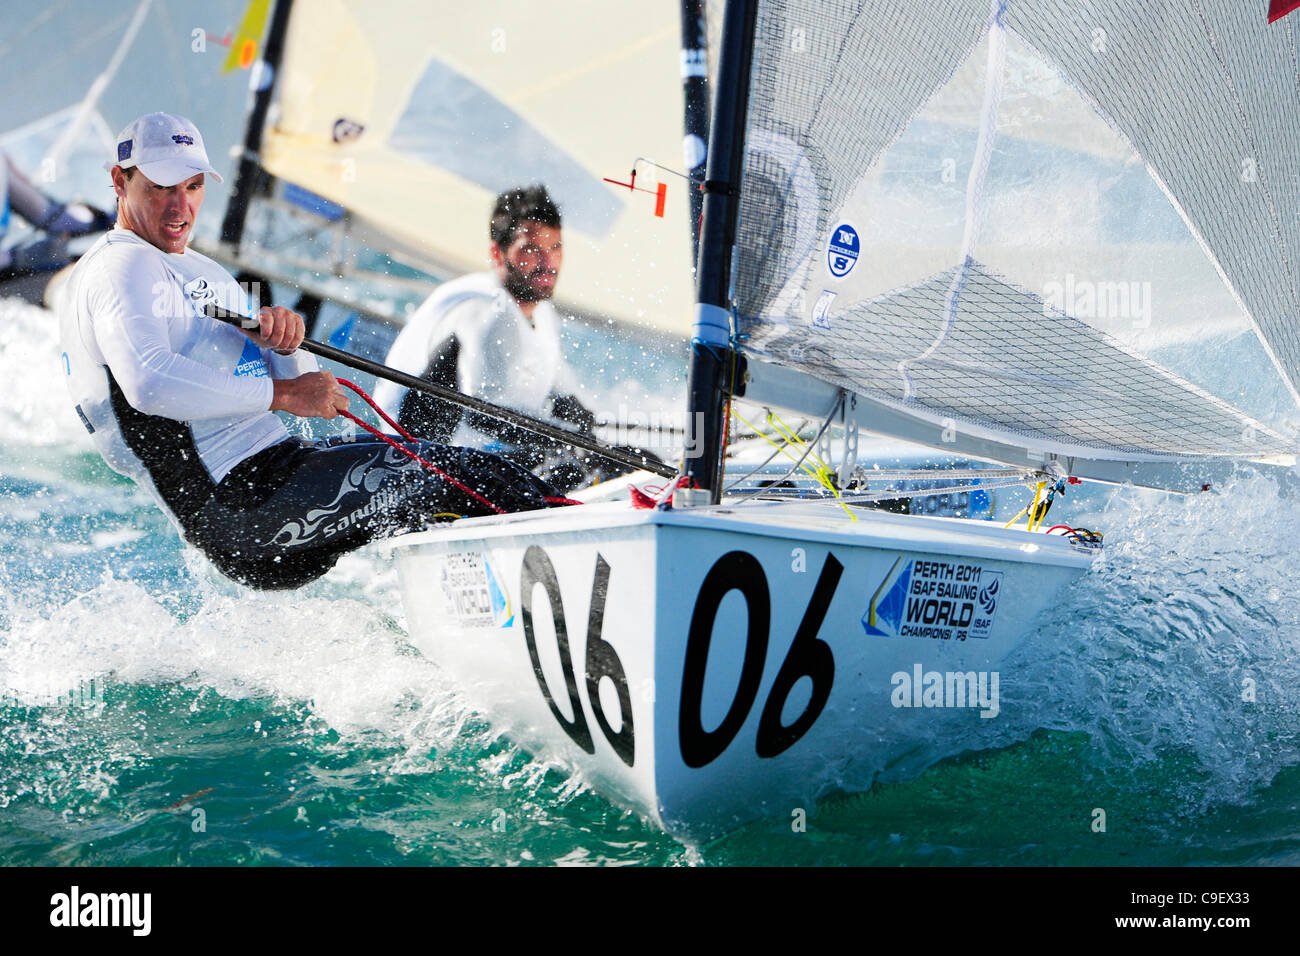 10.12.2011. Perth, Australia. Vasilij Zbogar (SLO) competes in the finn men's one person dinghy category on the eighth day of the ISAF World Sailing Championships a qualifying event for the 2012 Olympic Games, held in Fremantle on the Indian Ocean. Stock Photo